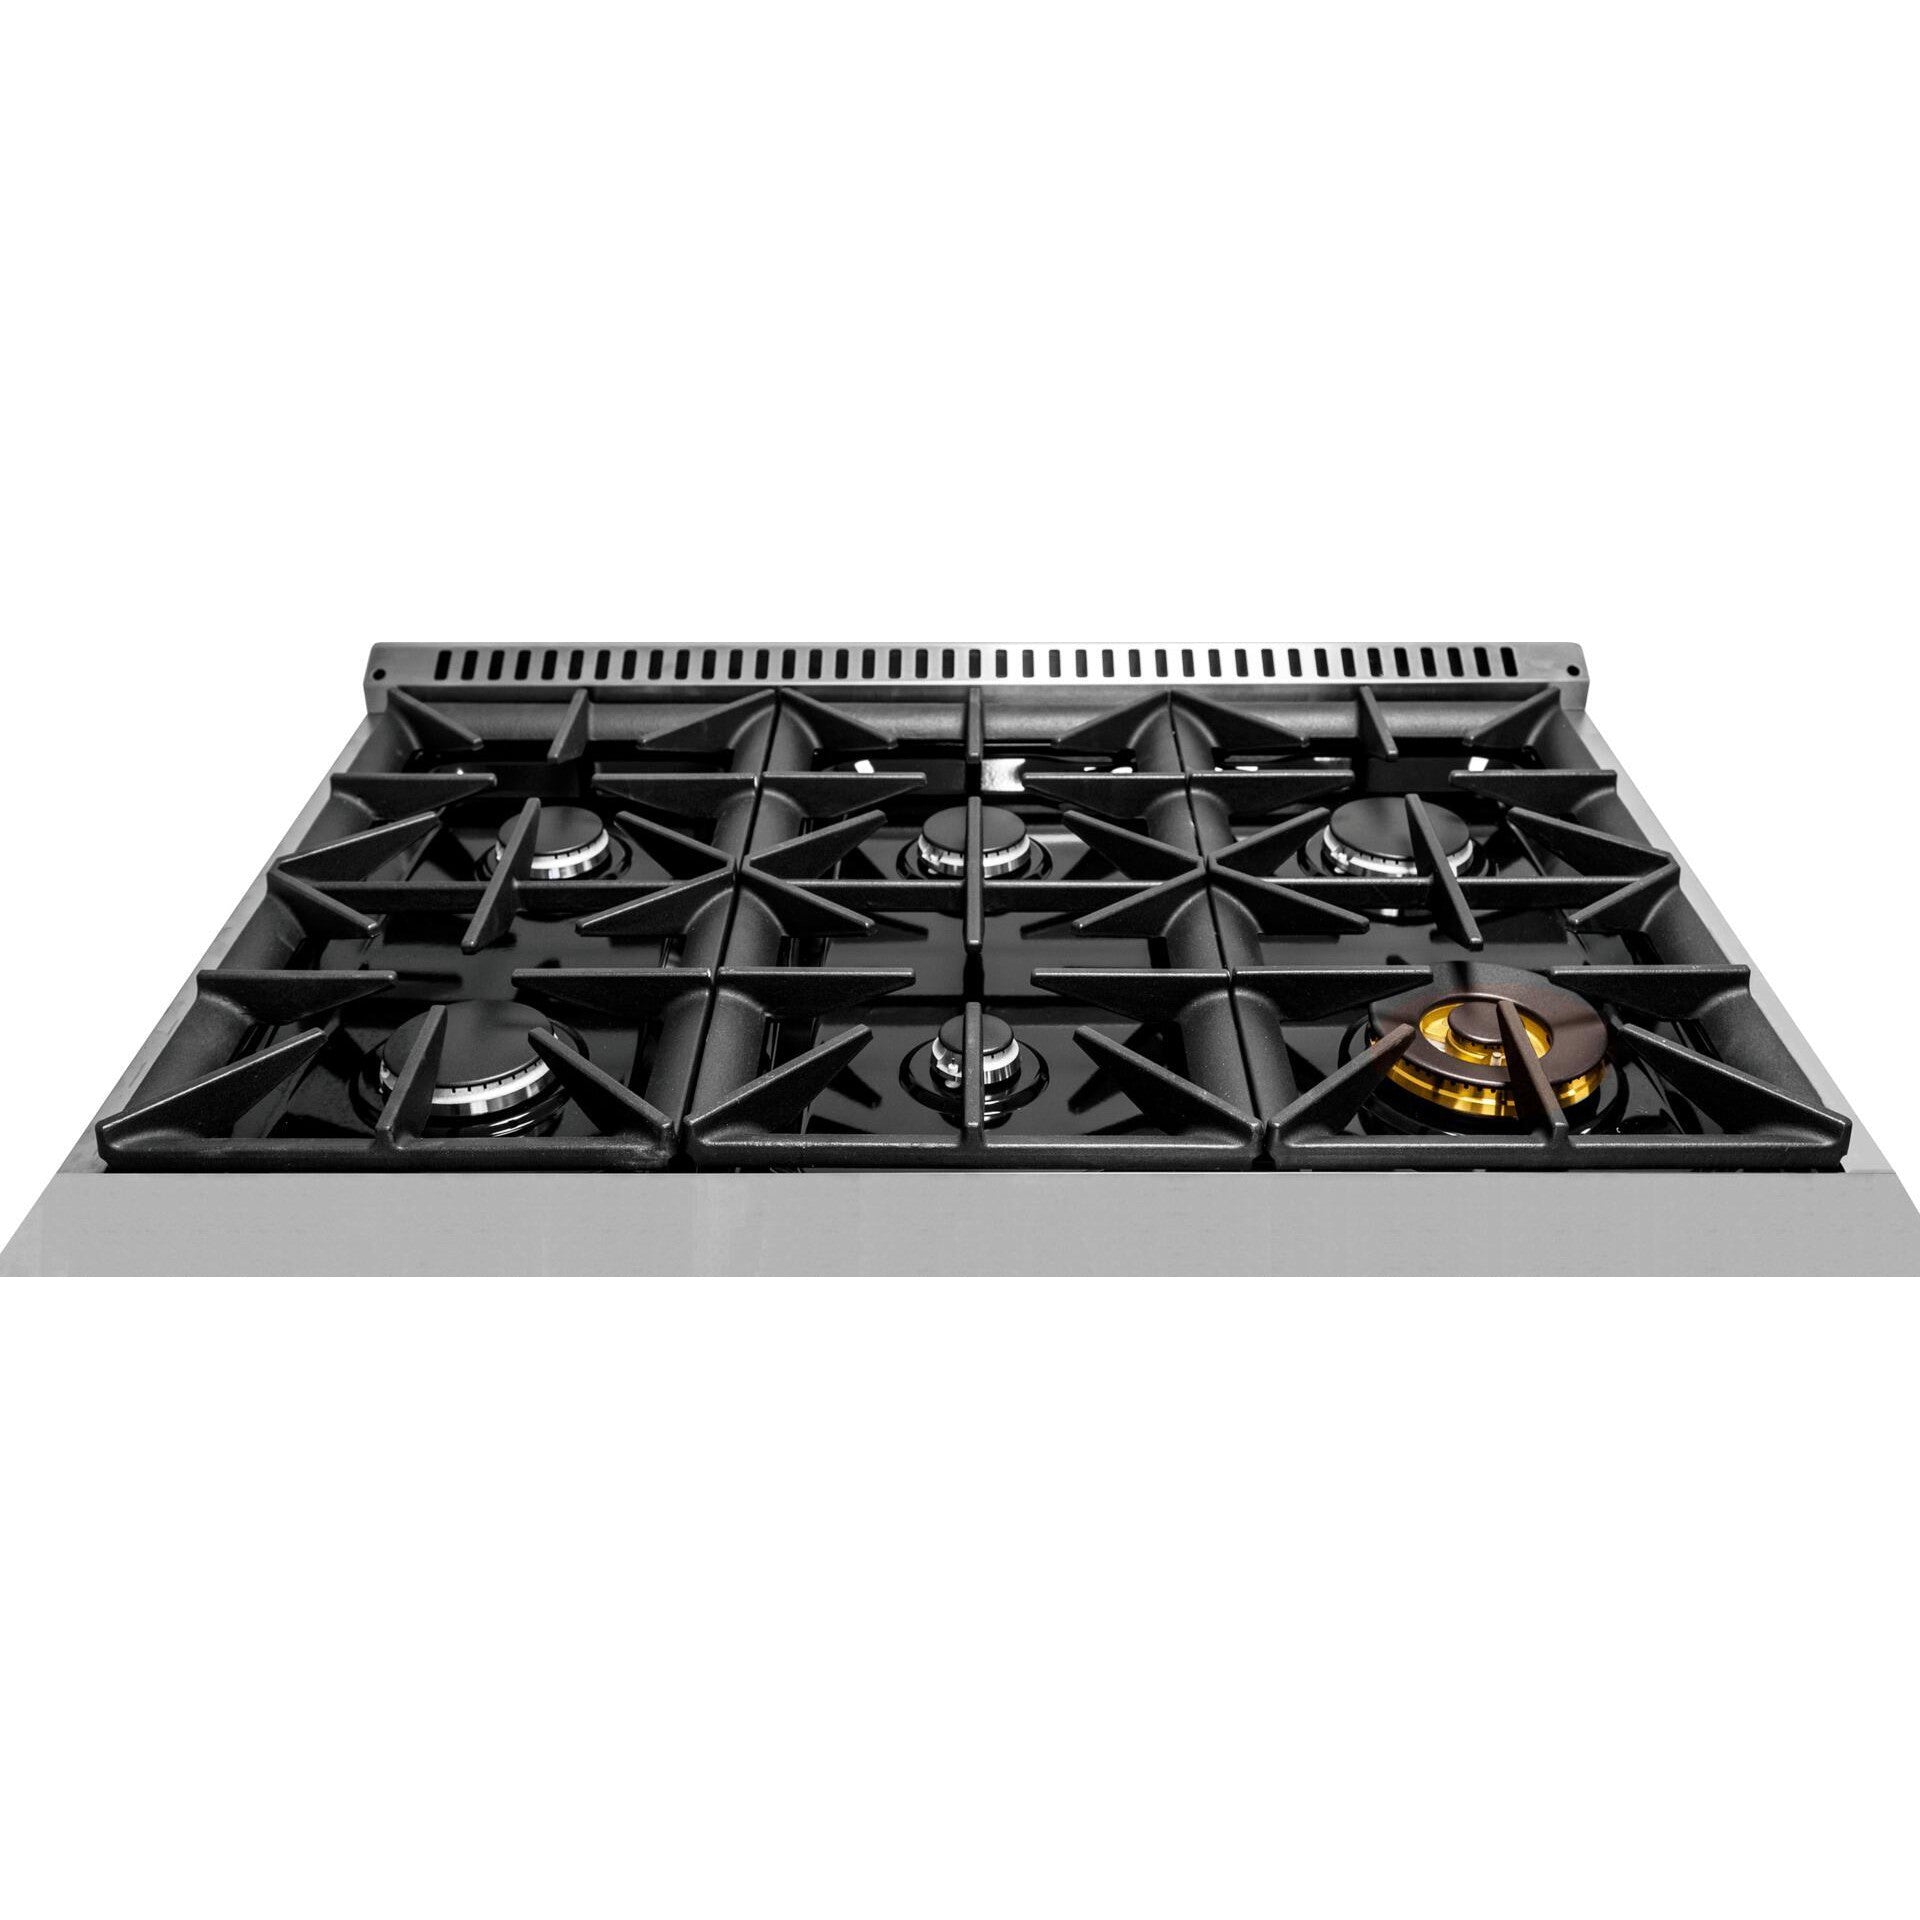 Forte FGR366BSS 36" 4.5 Cu. Ft. Single Oven Stainless Steel Freestanding Natural Gas LP Convertible Residential Gas Range With Convertion Kit, Grate, Racks, Trays, and Back Splash